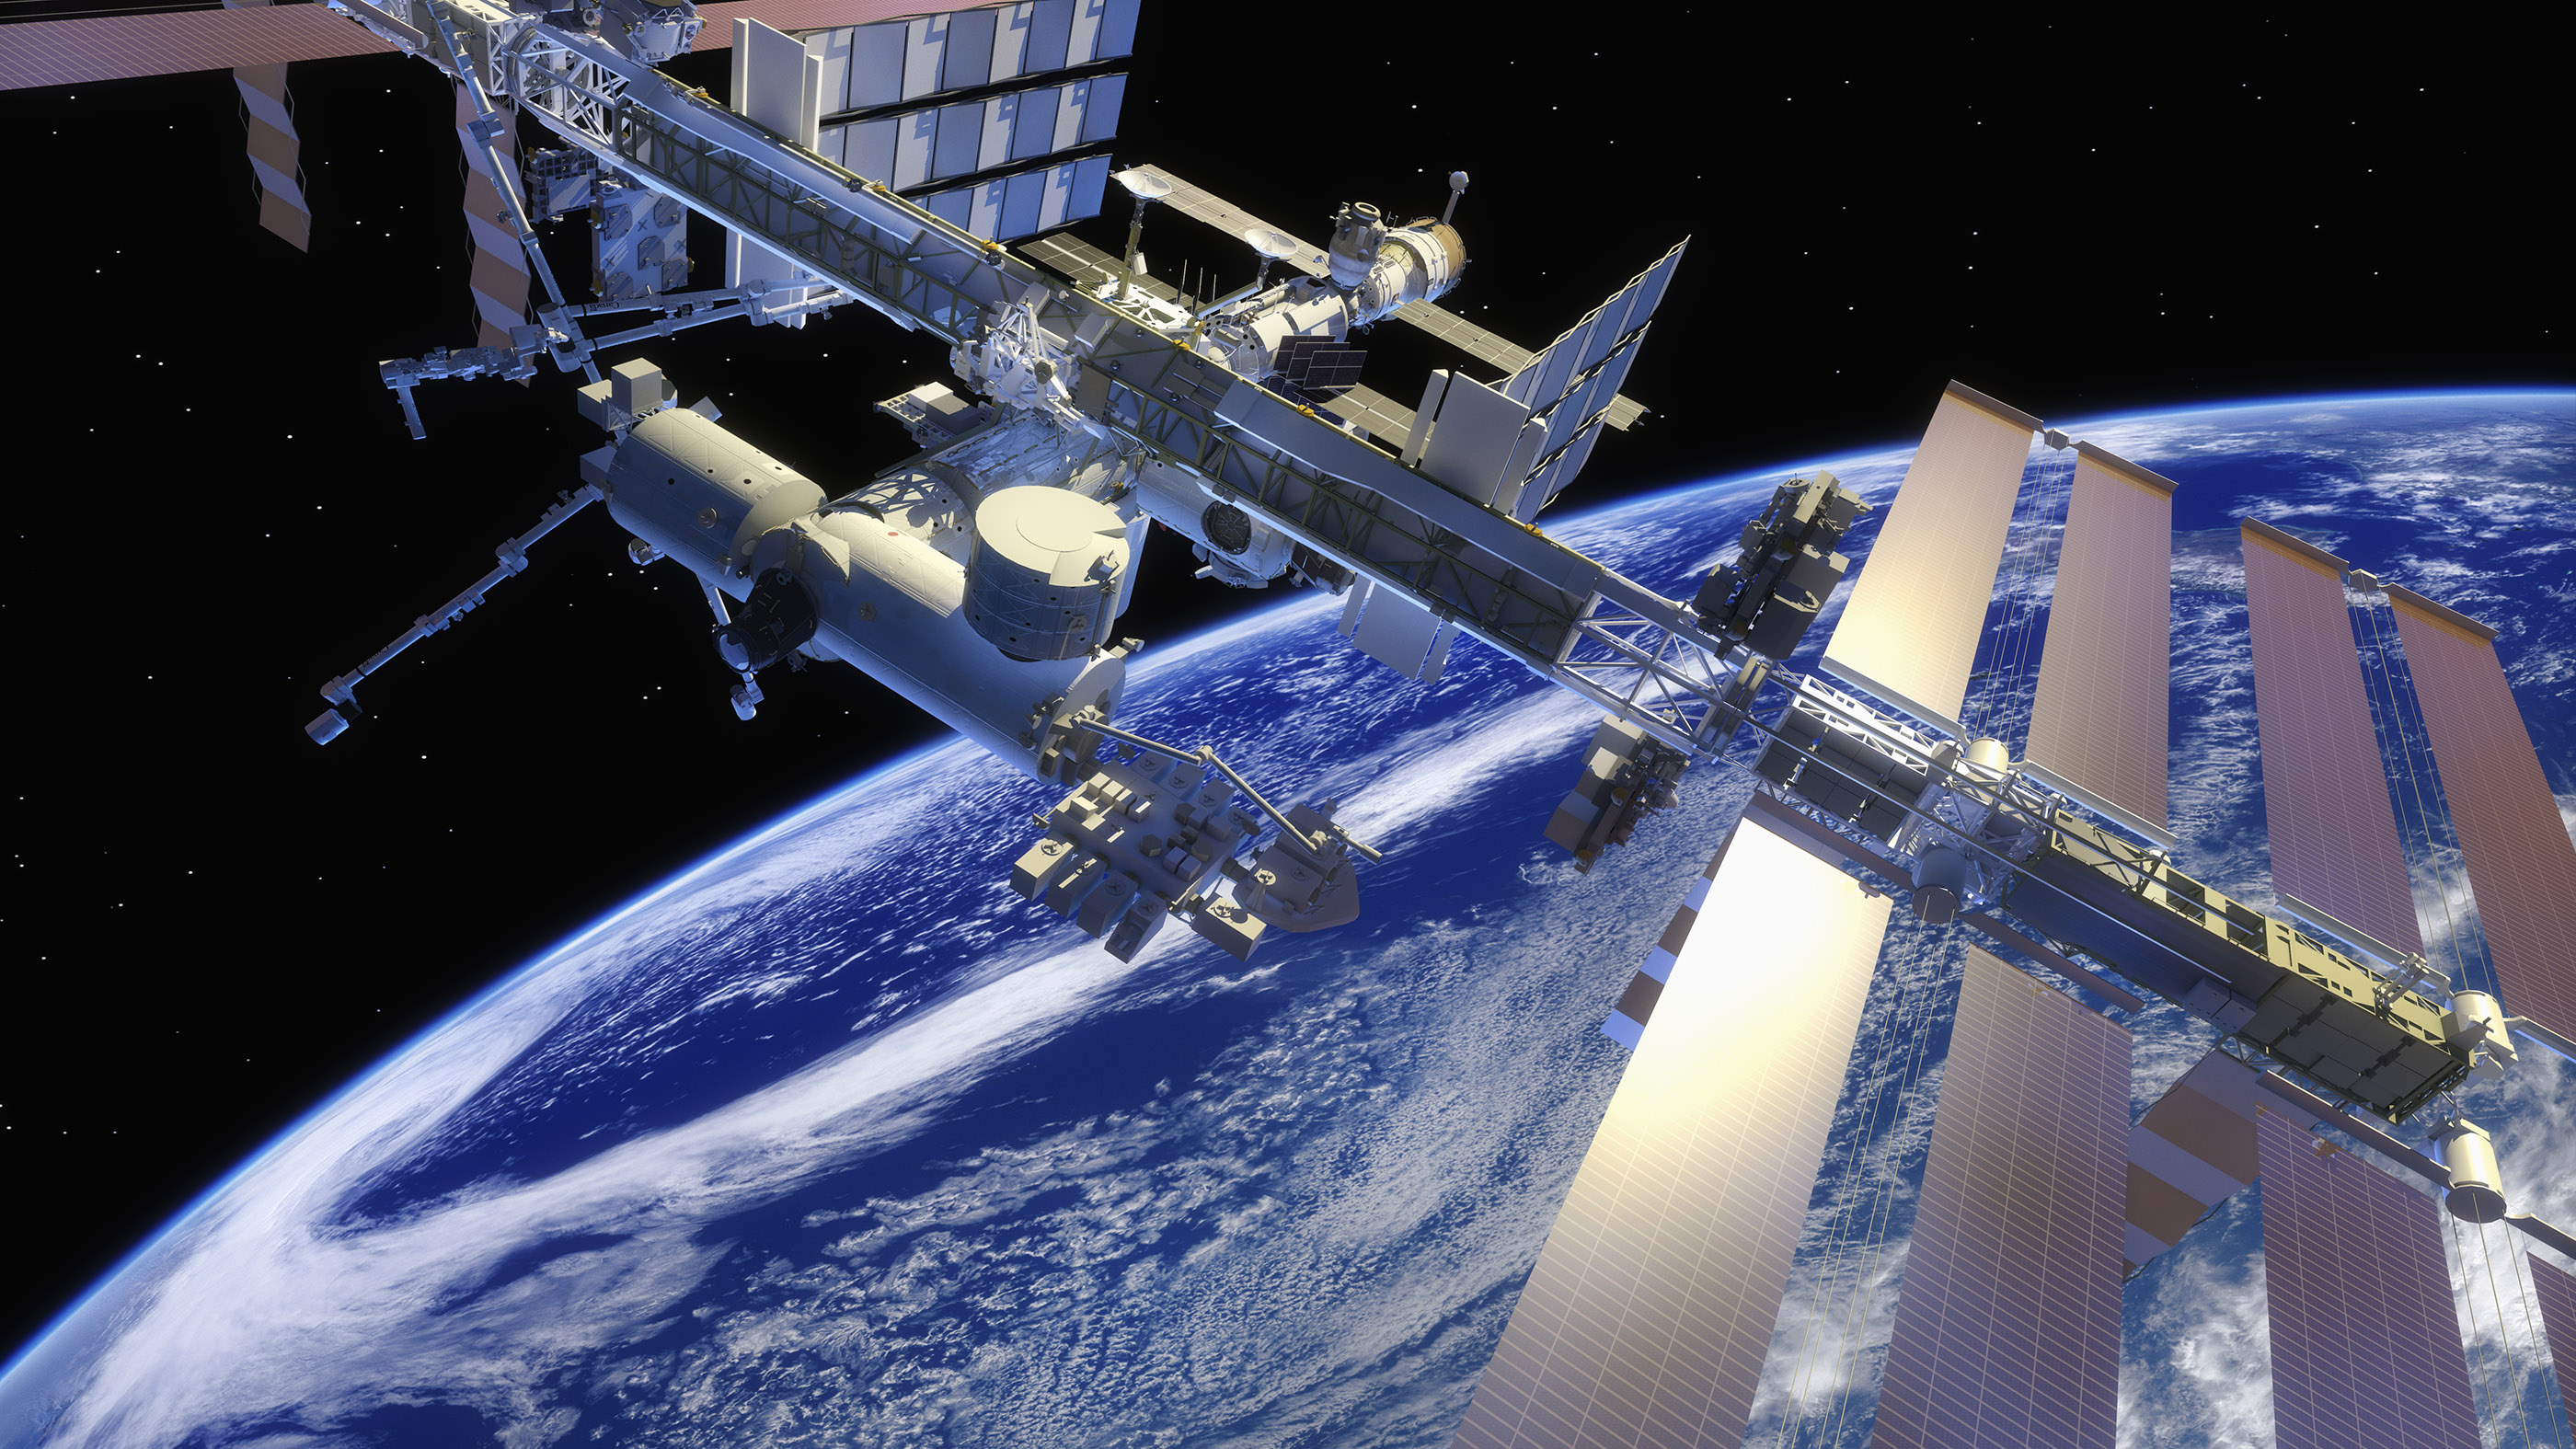 The International Space Station was threatened by space debris after a Russian missile test on November 16, 2021.